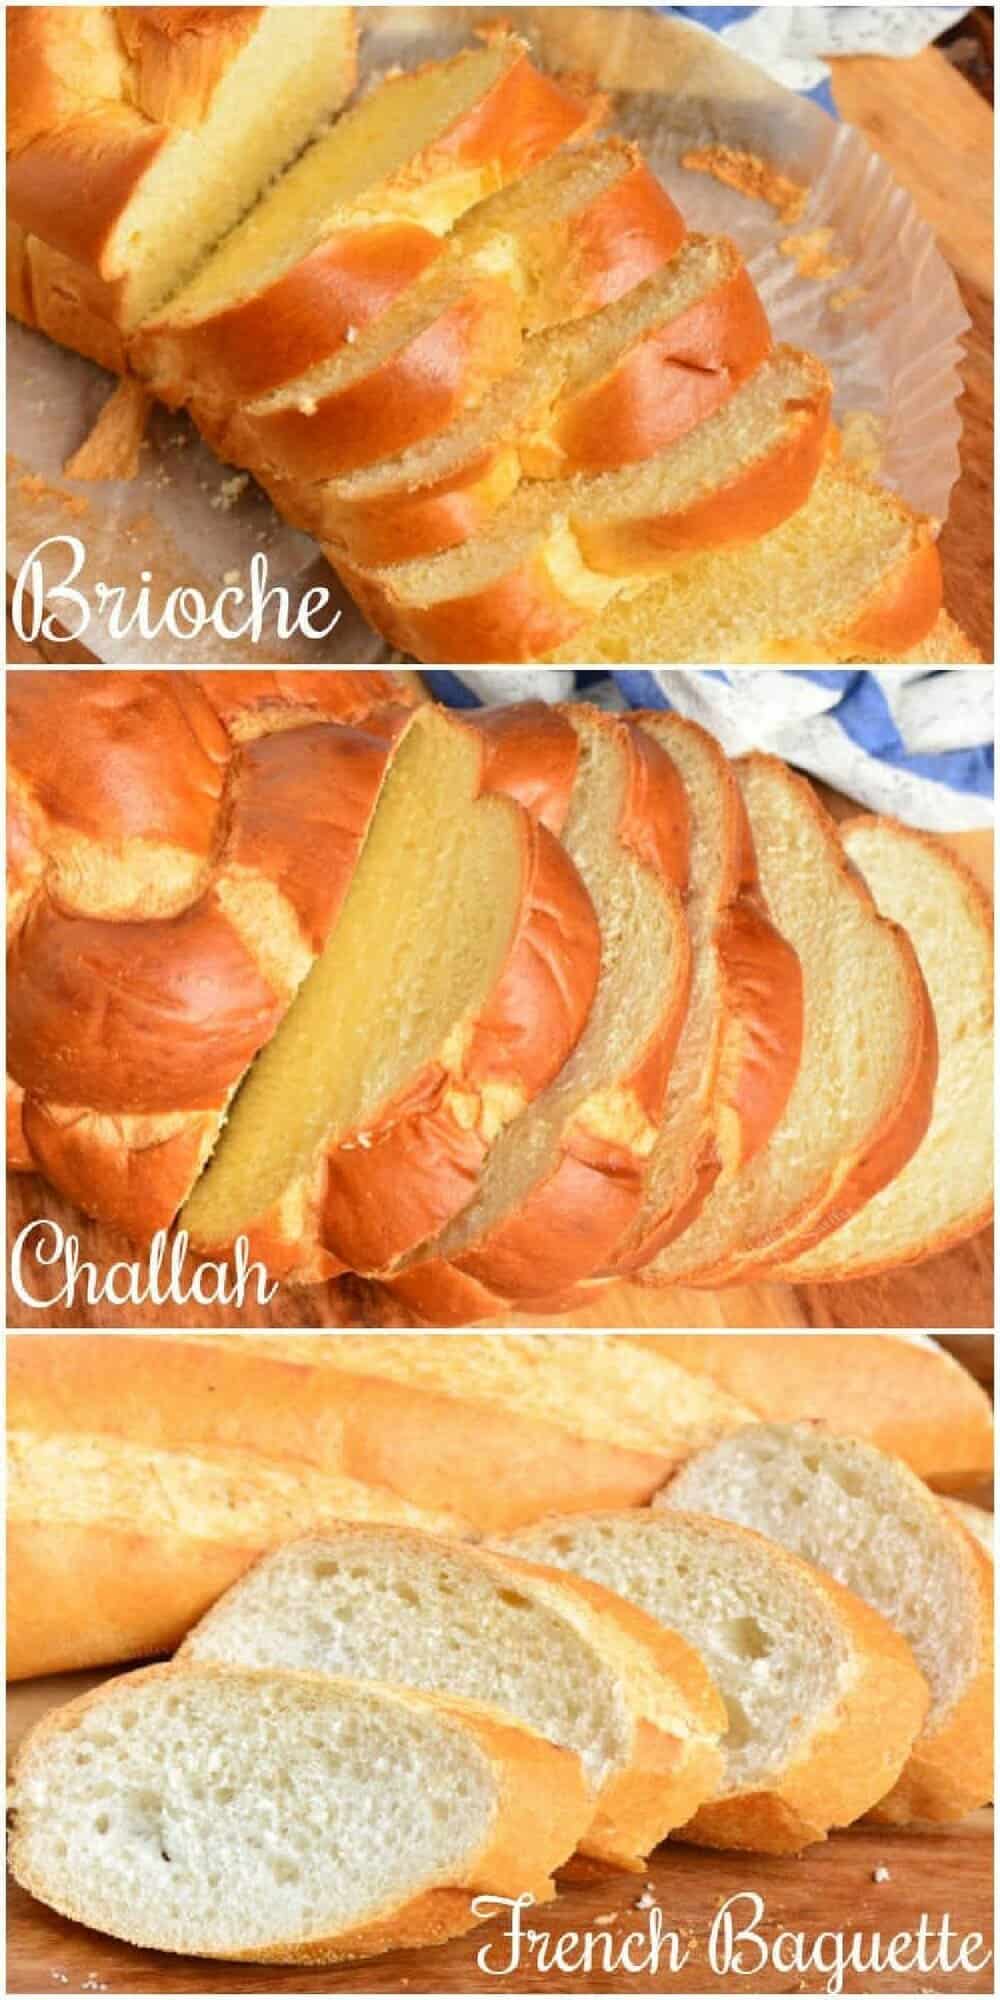 collage of three bread options for French toast bread: brioche, challah, and baguette.